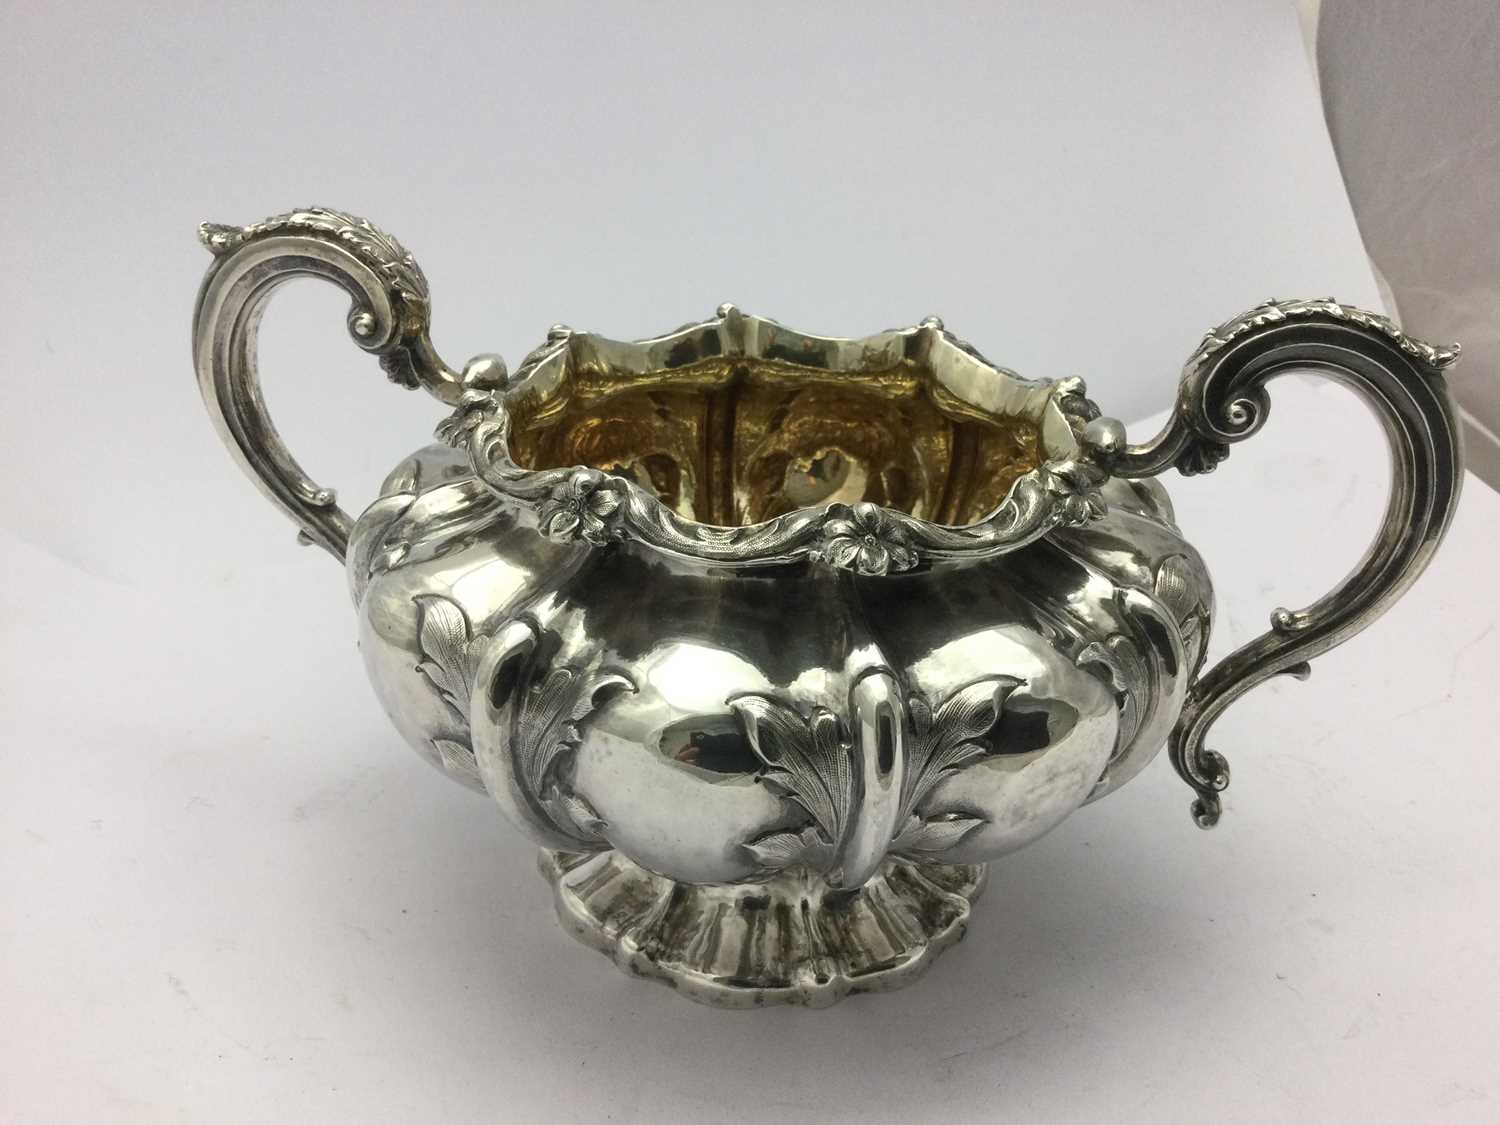 A William IV Silver Teapot, by Jonathan Hayne, London, 1833 - Image 8 of 9